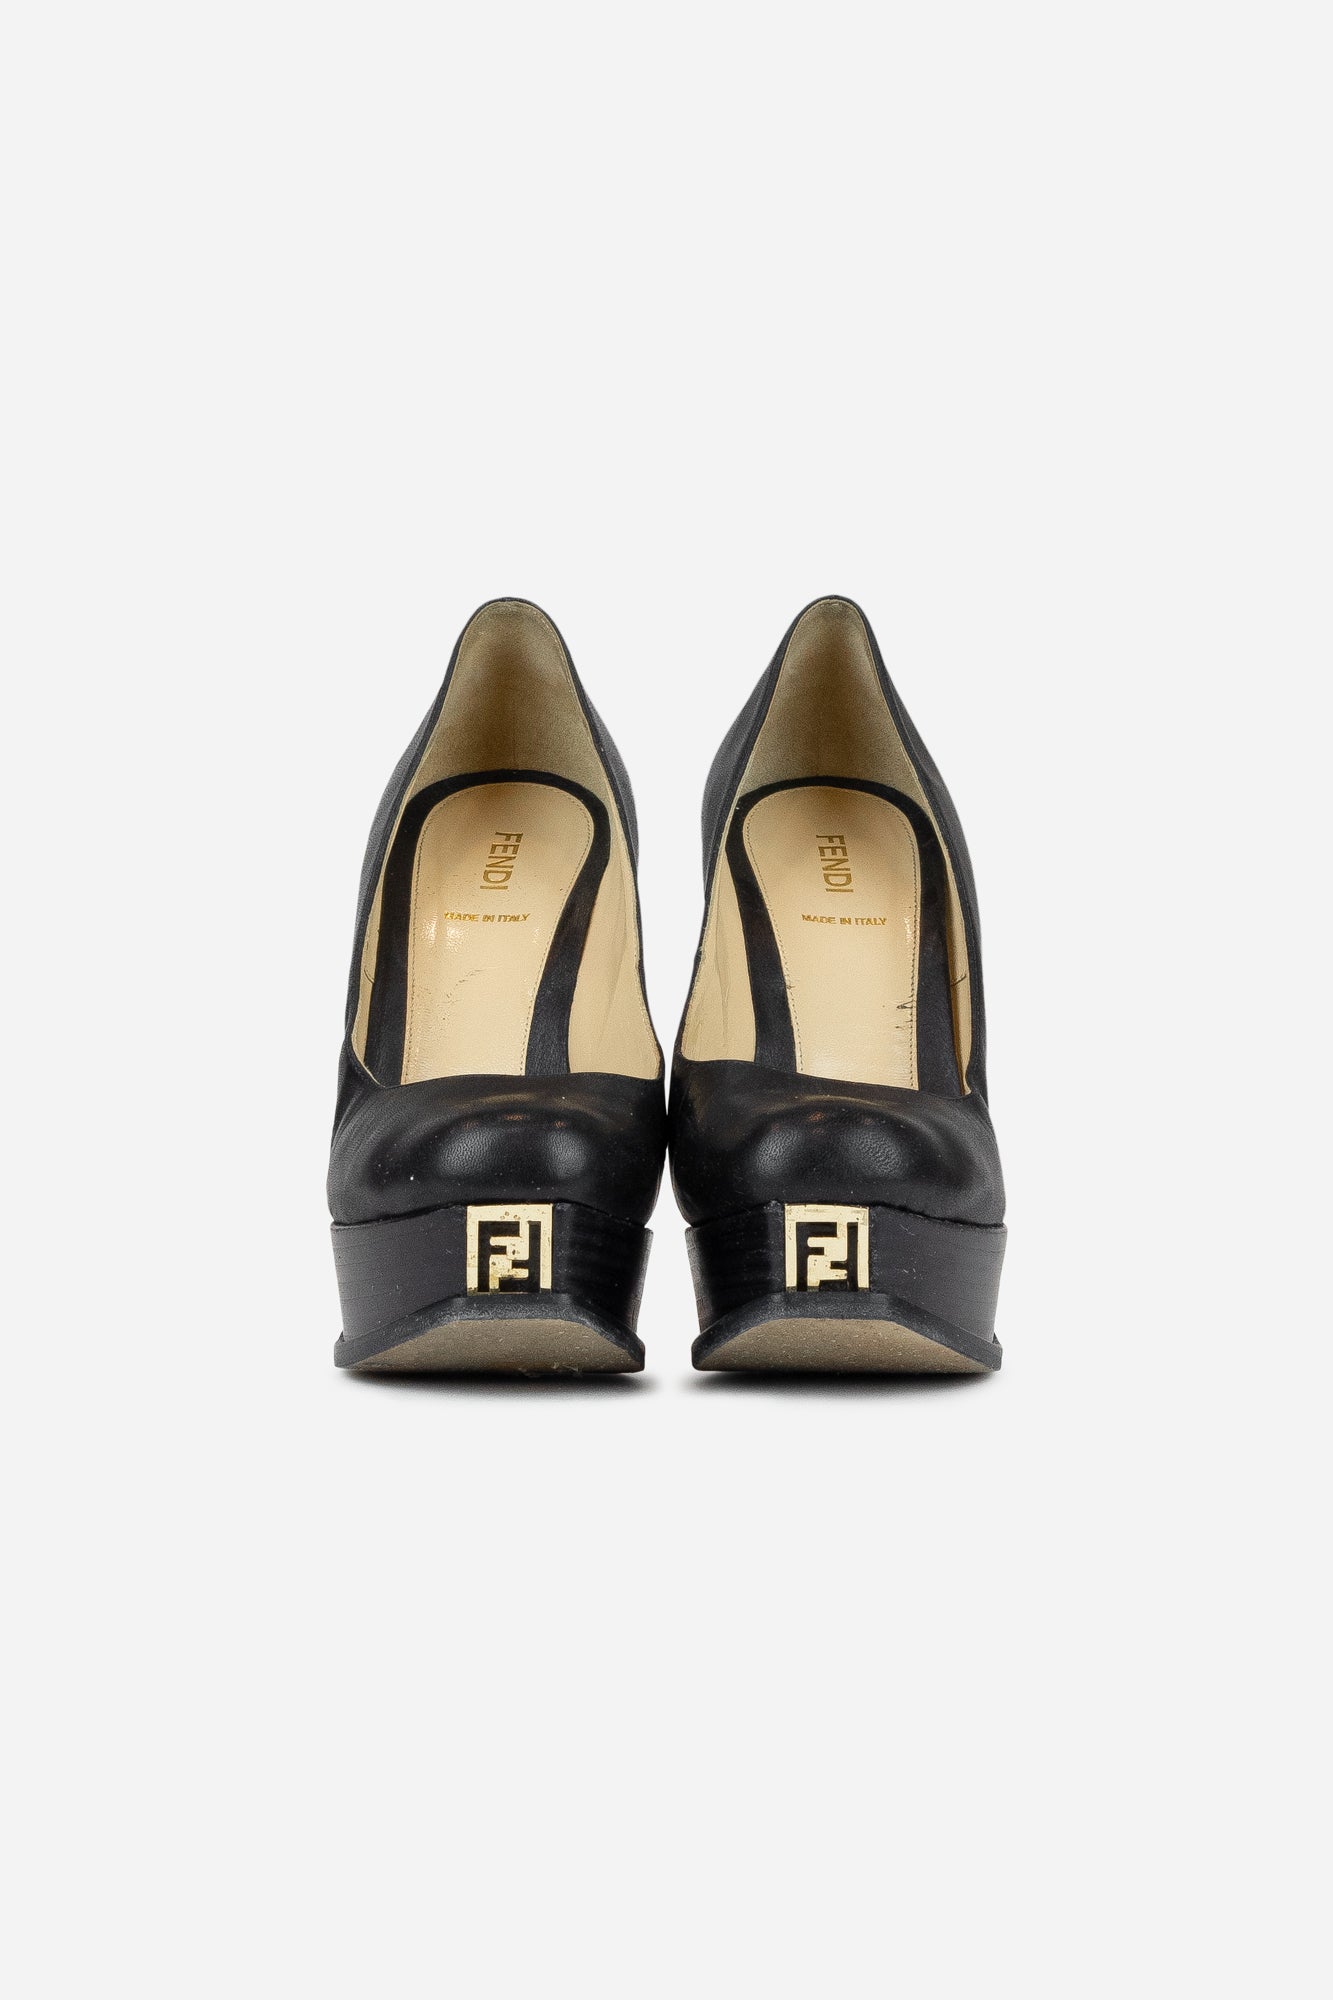 Platform FF Logo Pumps - So Over It Luxury Consignment